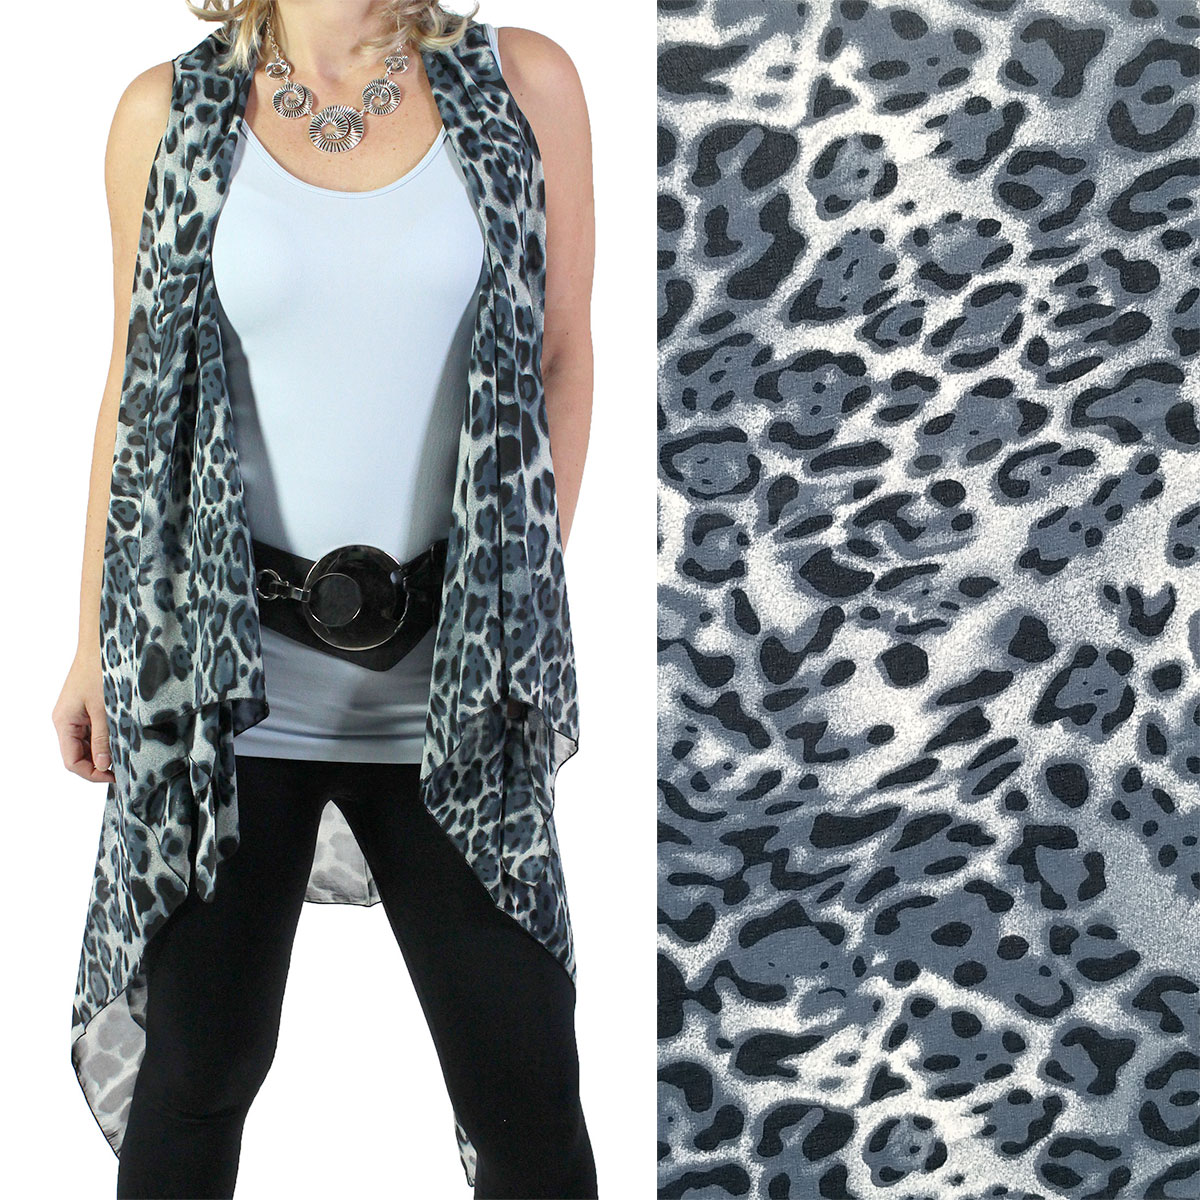 2144 - Chiffon Scarf Vests (Style 2)  #9938 ABSTRACT BLACK AND TAN Chiffon Scarf Vests (Style 2) - One Size Fits All